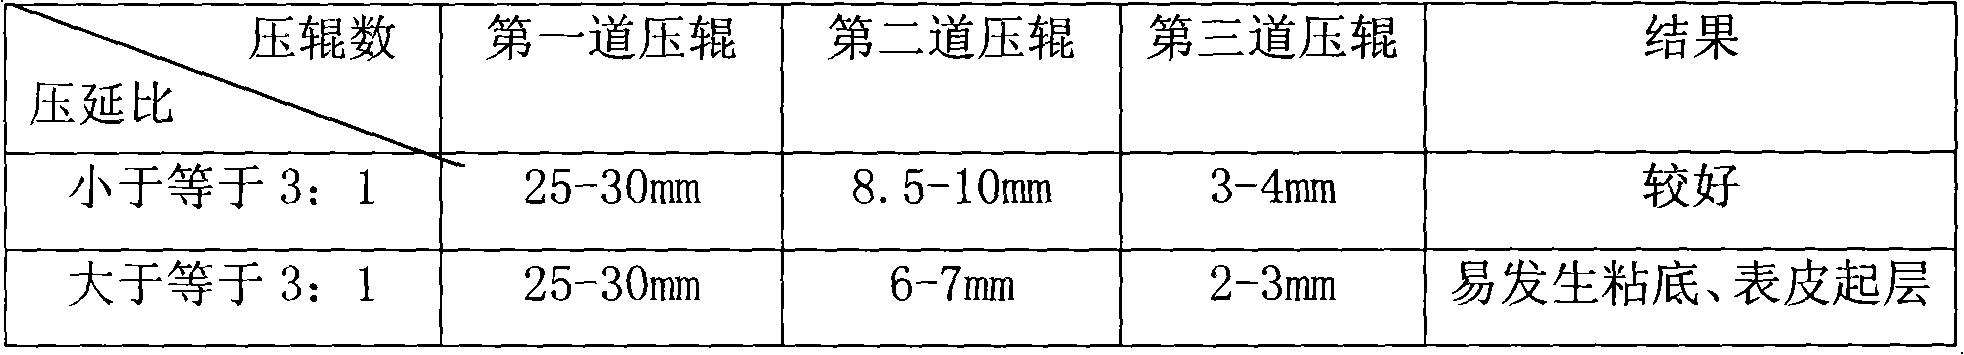 Processing method of coarse grain non-fried instant noodle